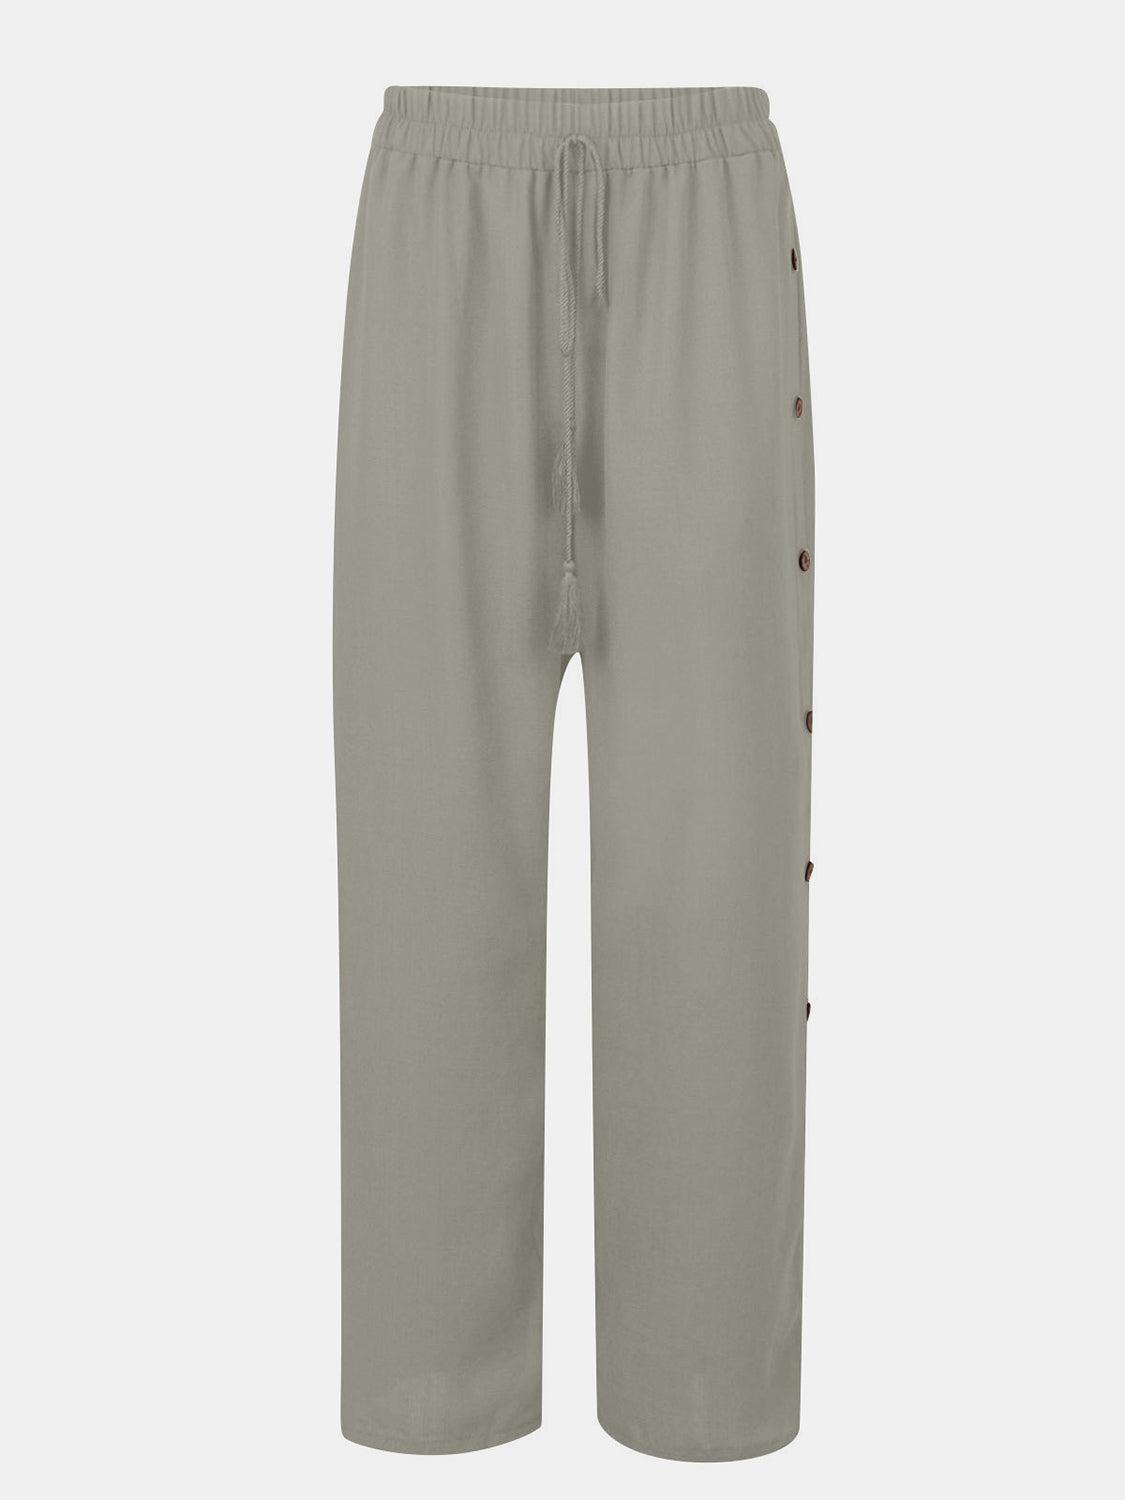 a grey pants with buttons on the side